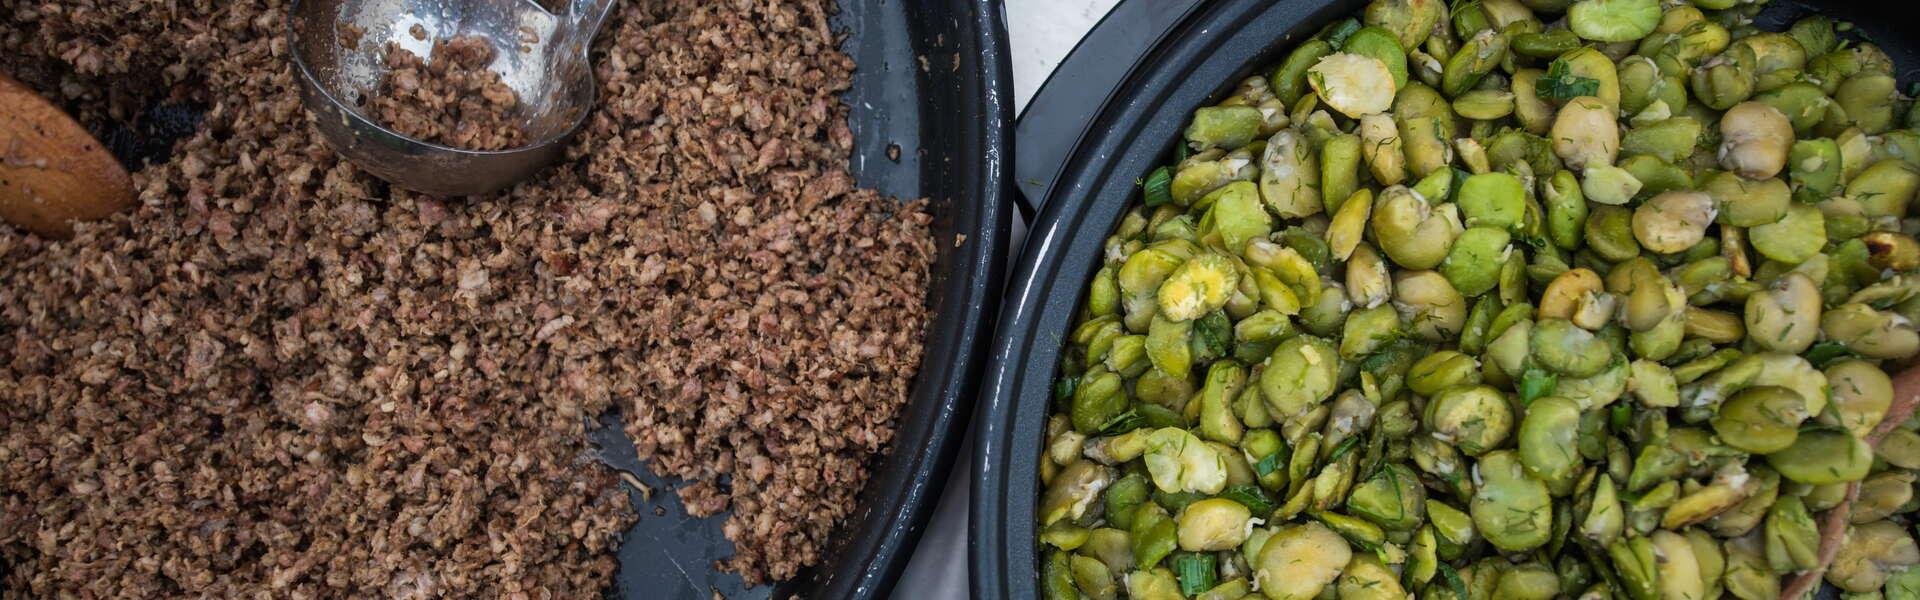 Two plates of food: one with broad beans, the other with buckwheat groats